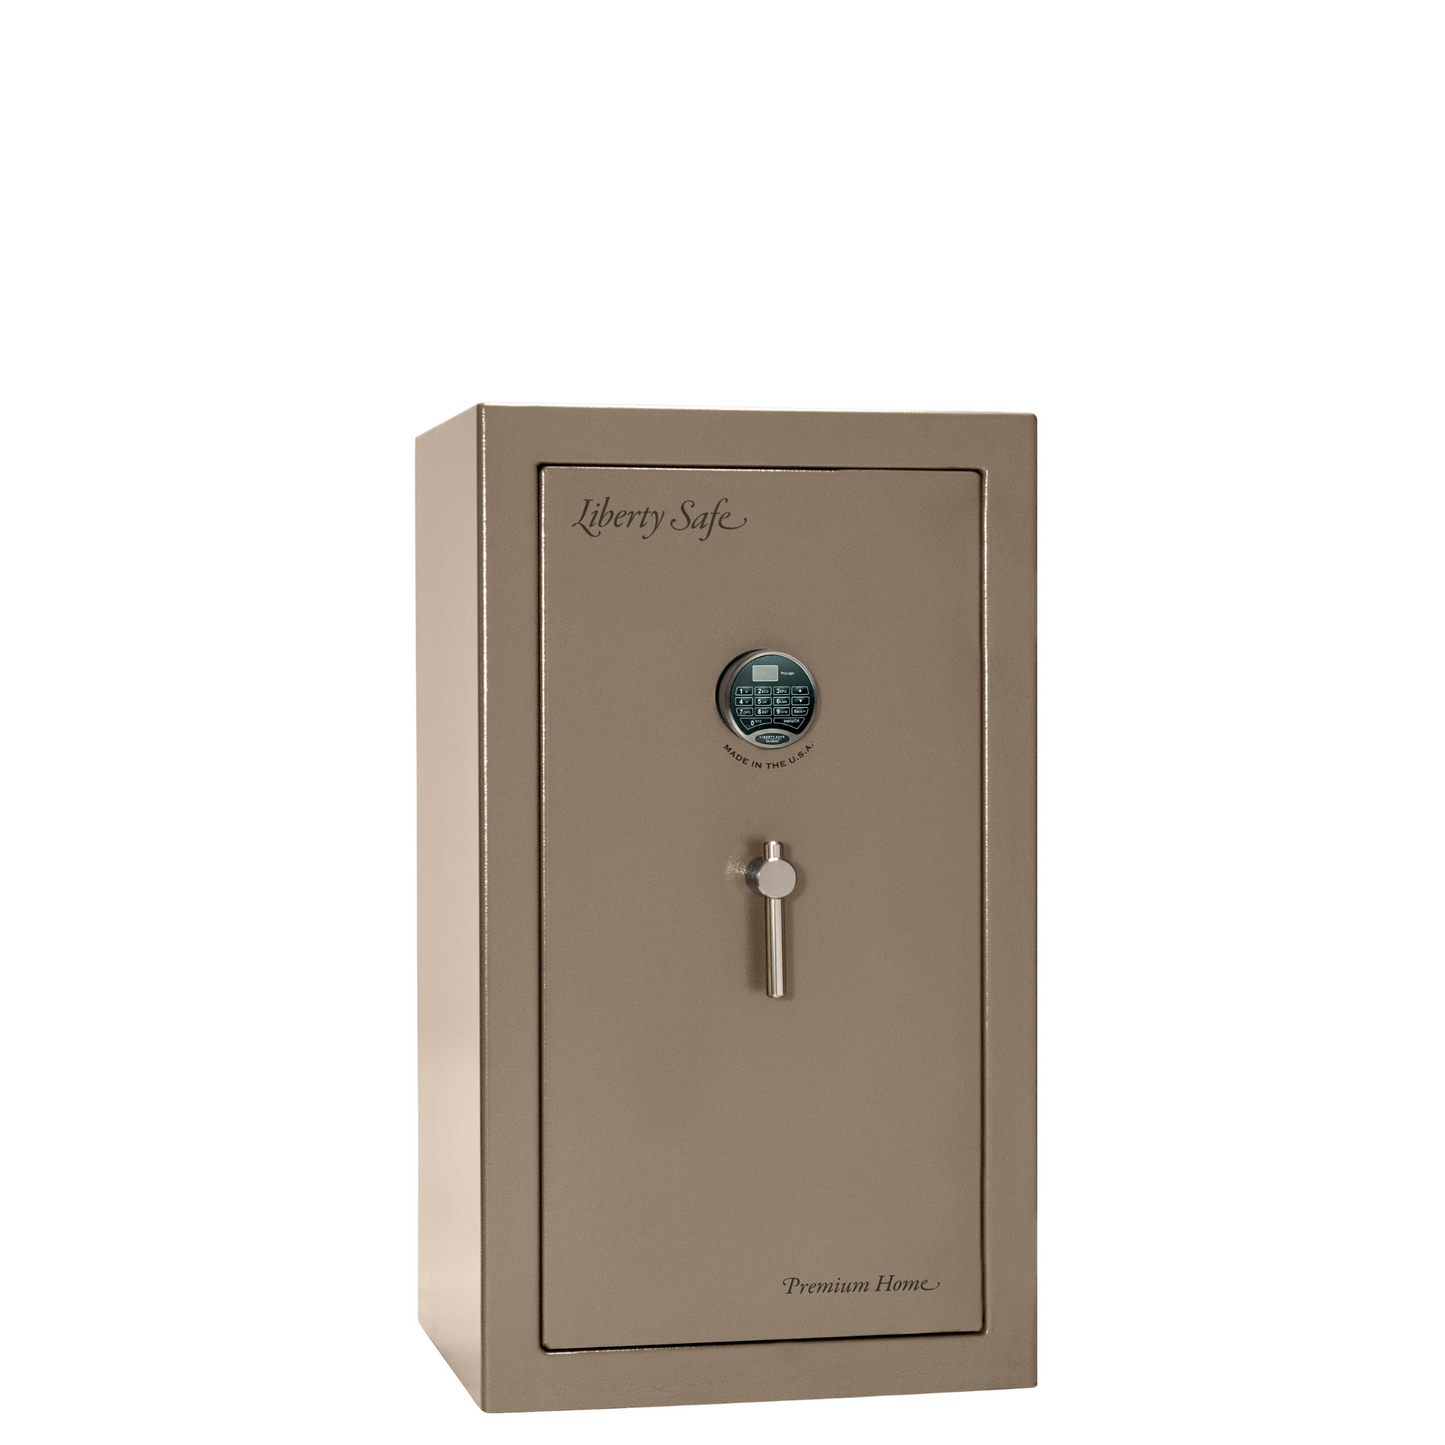 Premium Home Series | Level 7 Security | 2 Hour Fire Protection | 12 | Dimensions: 41.75"(H) x 24.5"(W) x 19"(D) | Champagne Marble - Closed Door